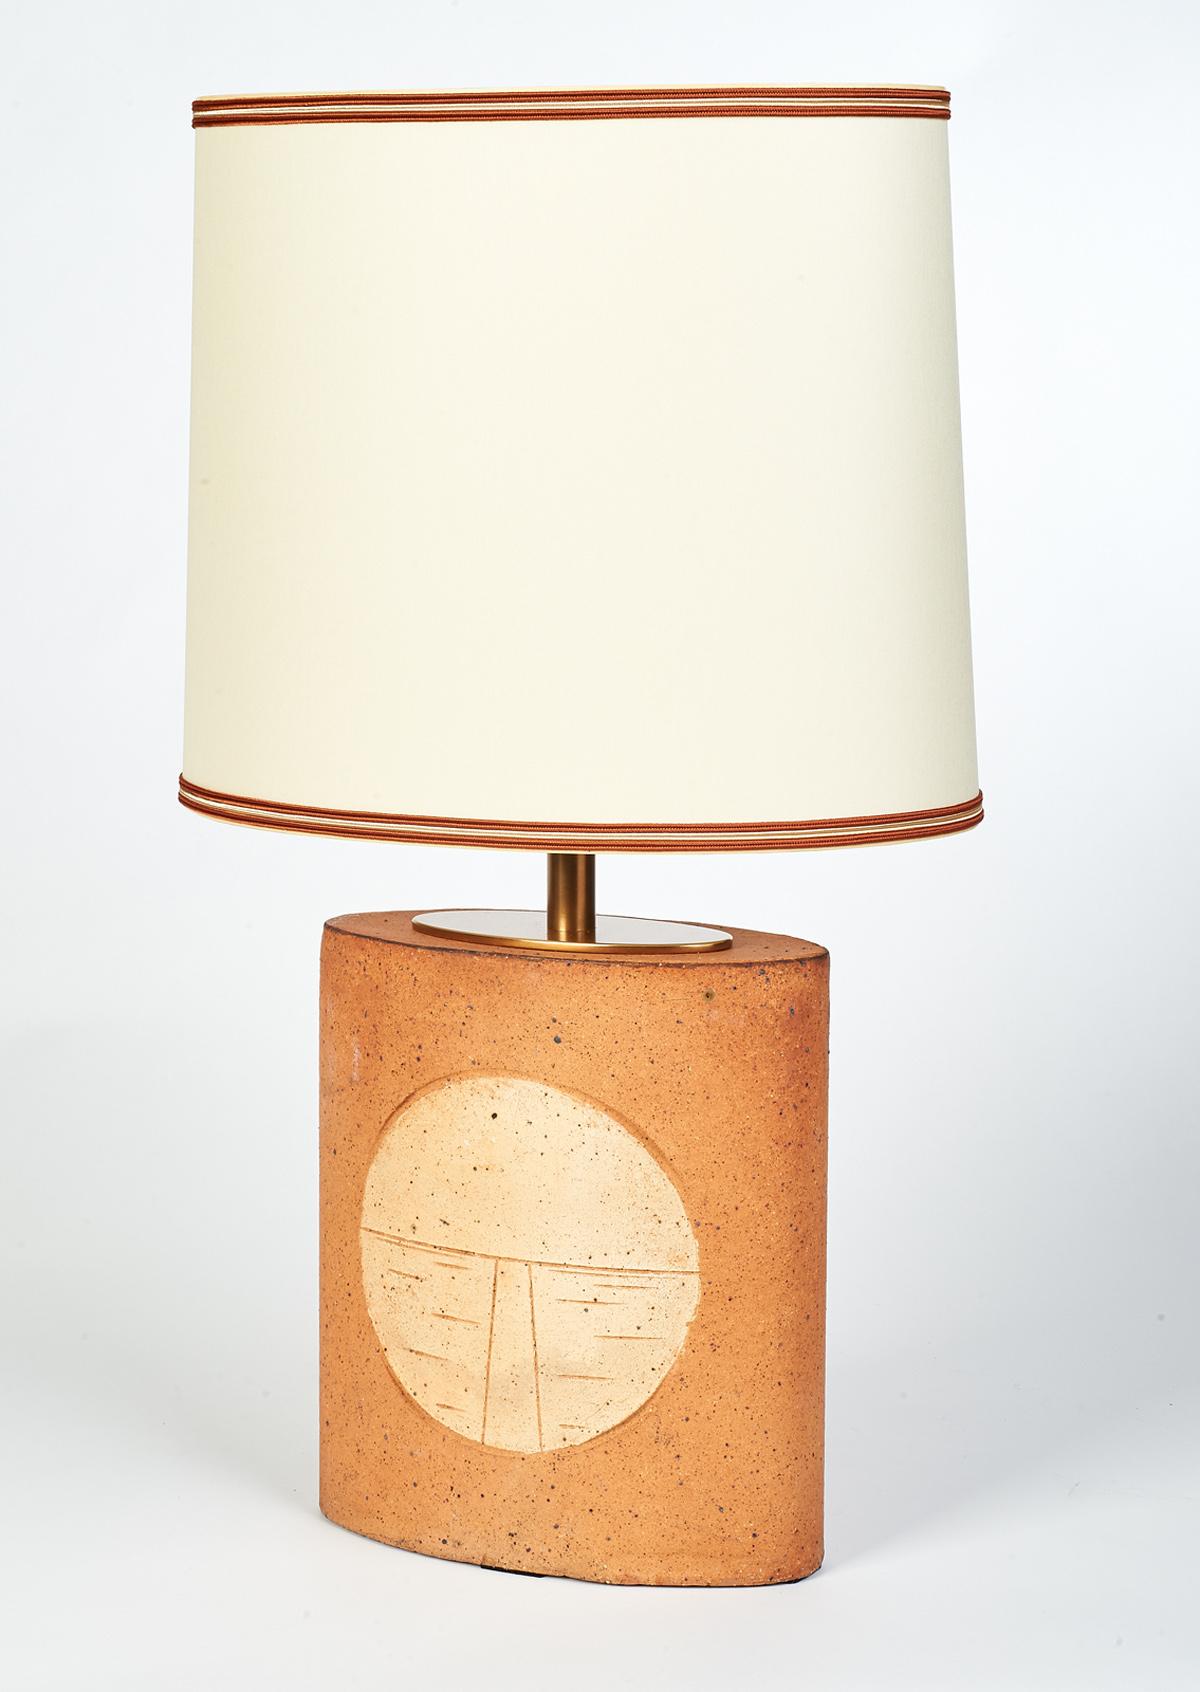 Mid-Century Modern Two Oval Ceramic Lamps with Incised Geometric Motif, France, 1970s For Sale